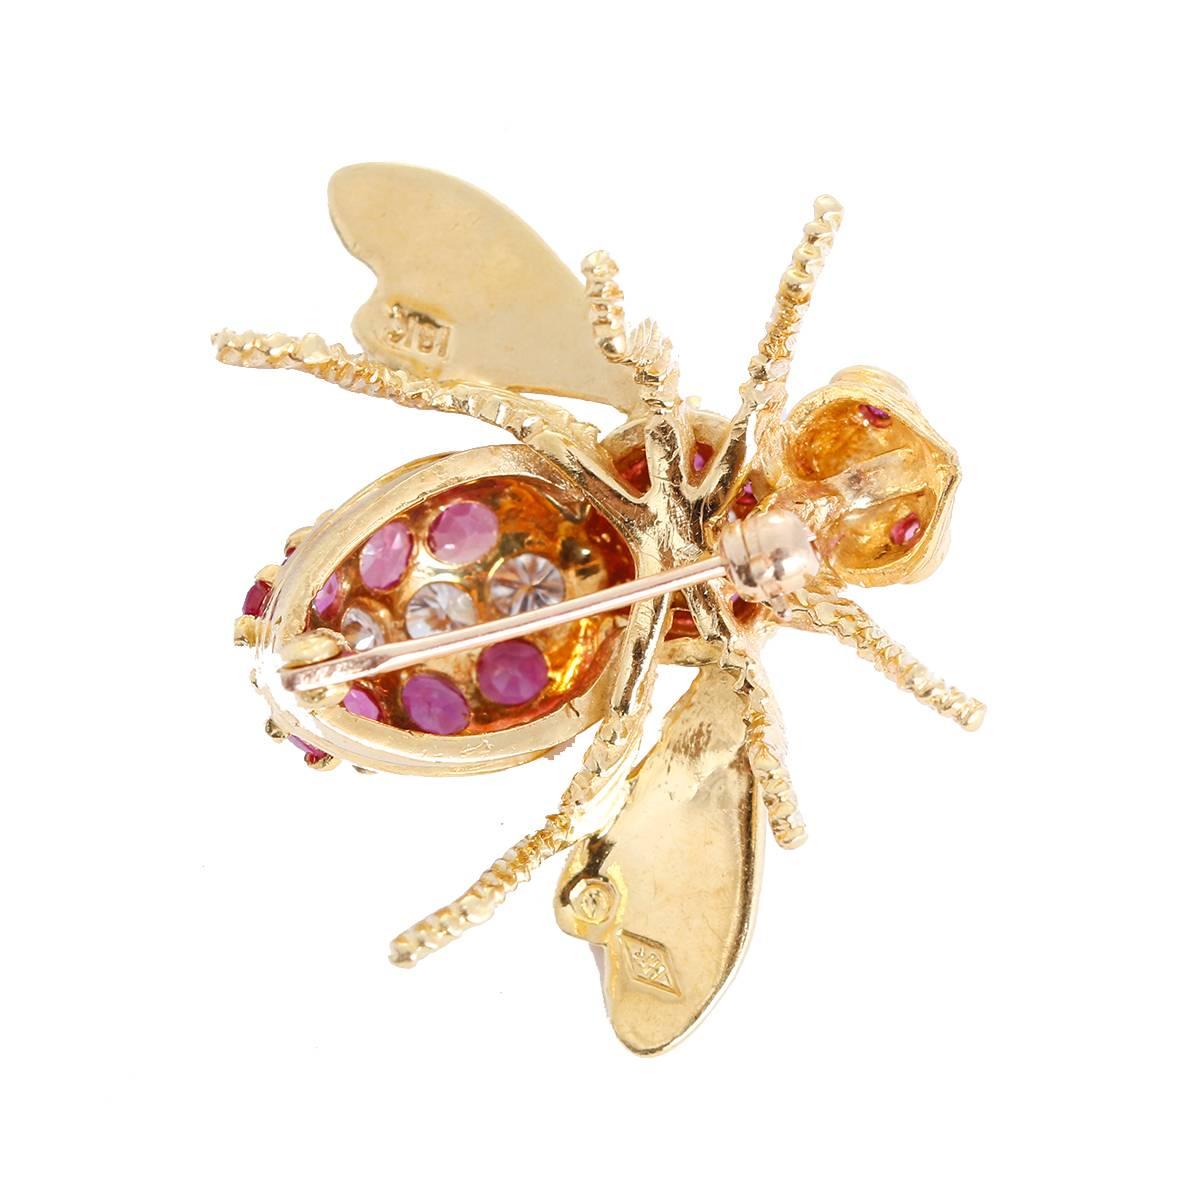 This amazing large bee pin features 2.3 ctw. (F-G Color and VS2-Clarity) of diamonds with fine quality rubies set in 18k yellow gold.  Total weight is 10.2 grams.Pin measures apx. 1-1/4 x 1-inch.  Hallmarked, HR and 18K.